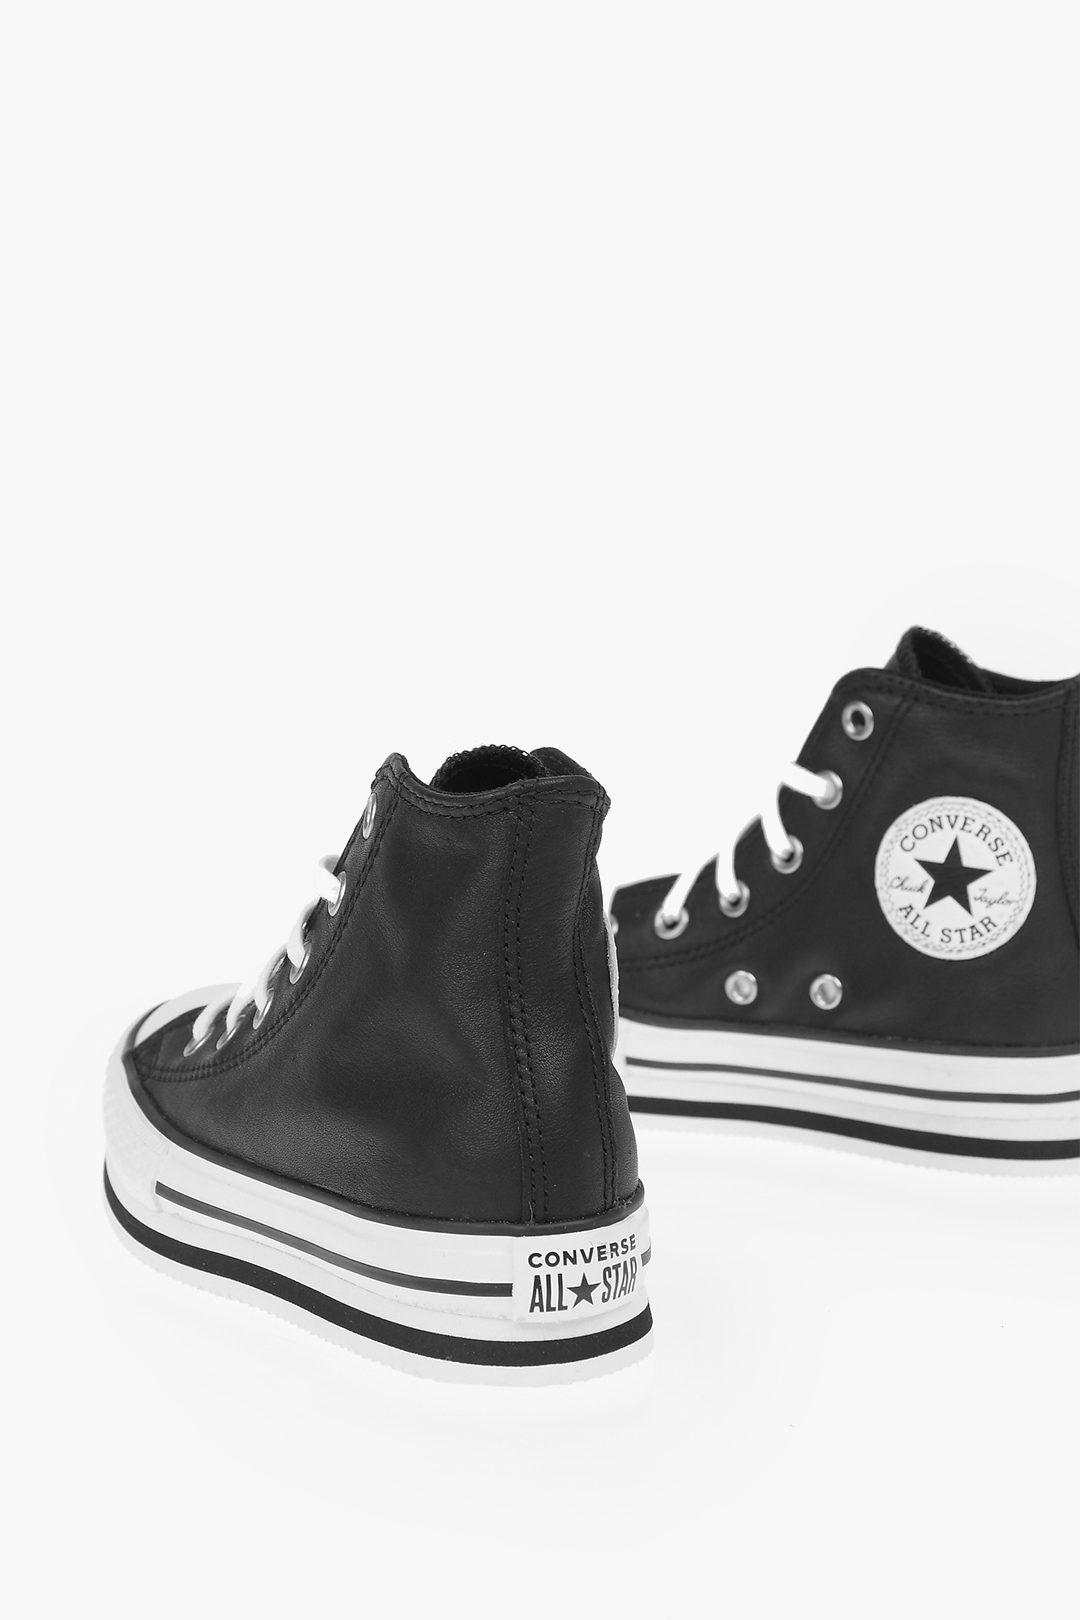 Converse KIDS ALL STAR Leather Sneakers with Platform girls - Glamood Outlet